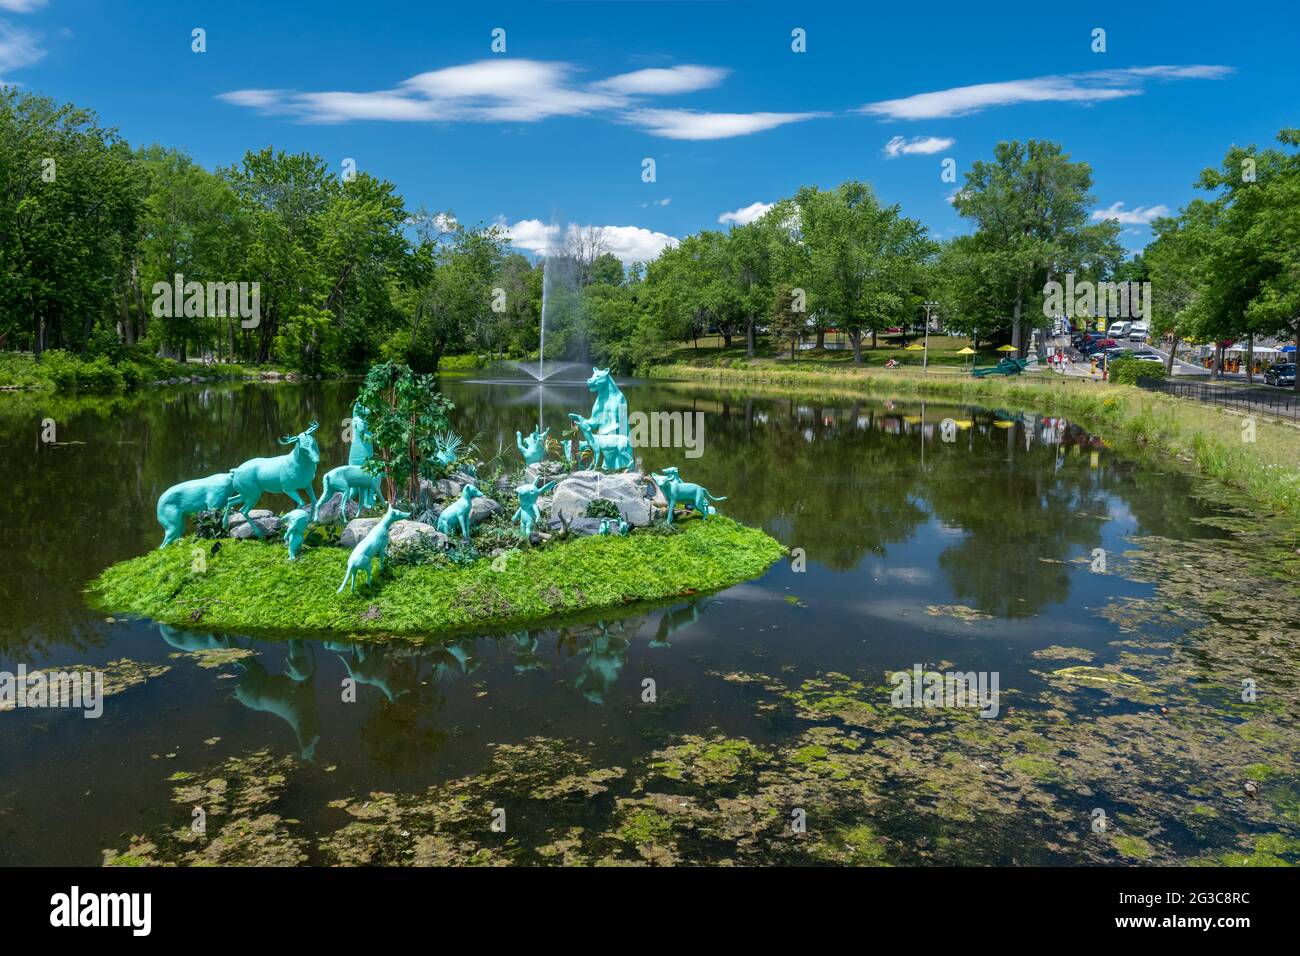 Terrebonne, Quebec, Canada - 11 June 2021: The happy shipwrecks created by Isabelle Demers and Fanny Mesnard in the Île-des-Moulins pond Stock Photo